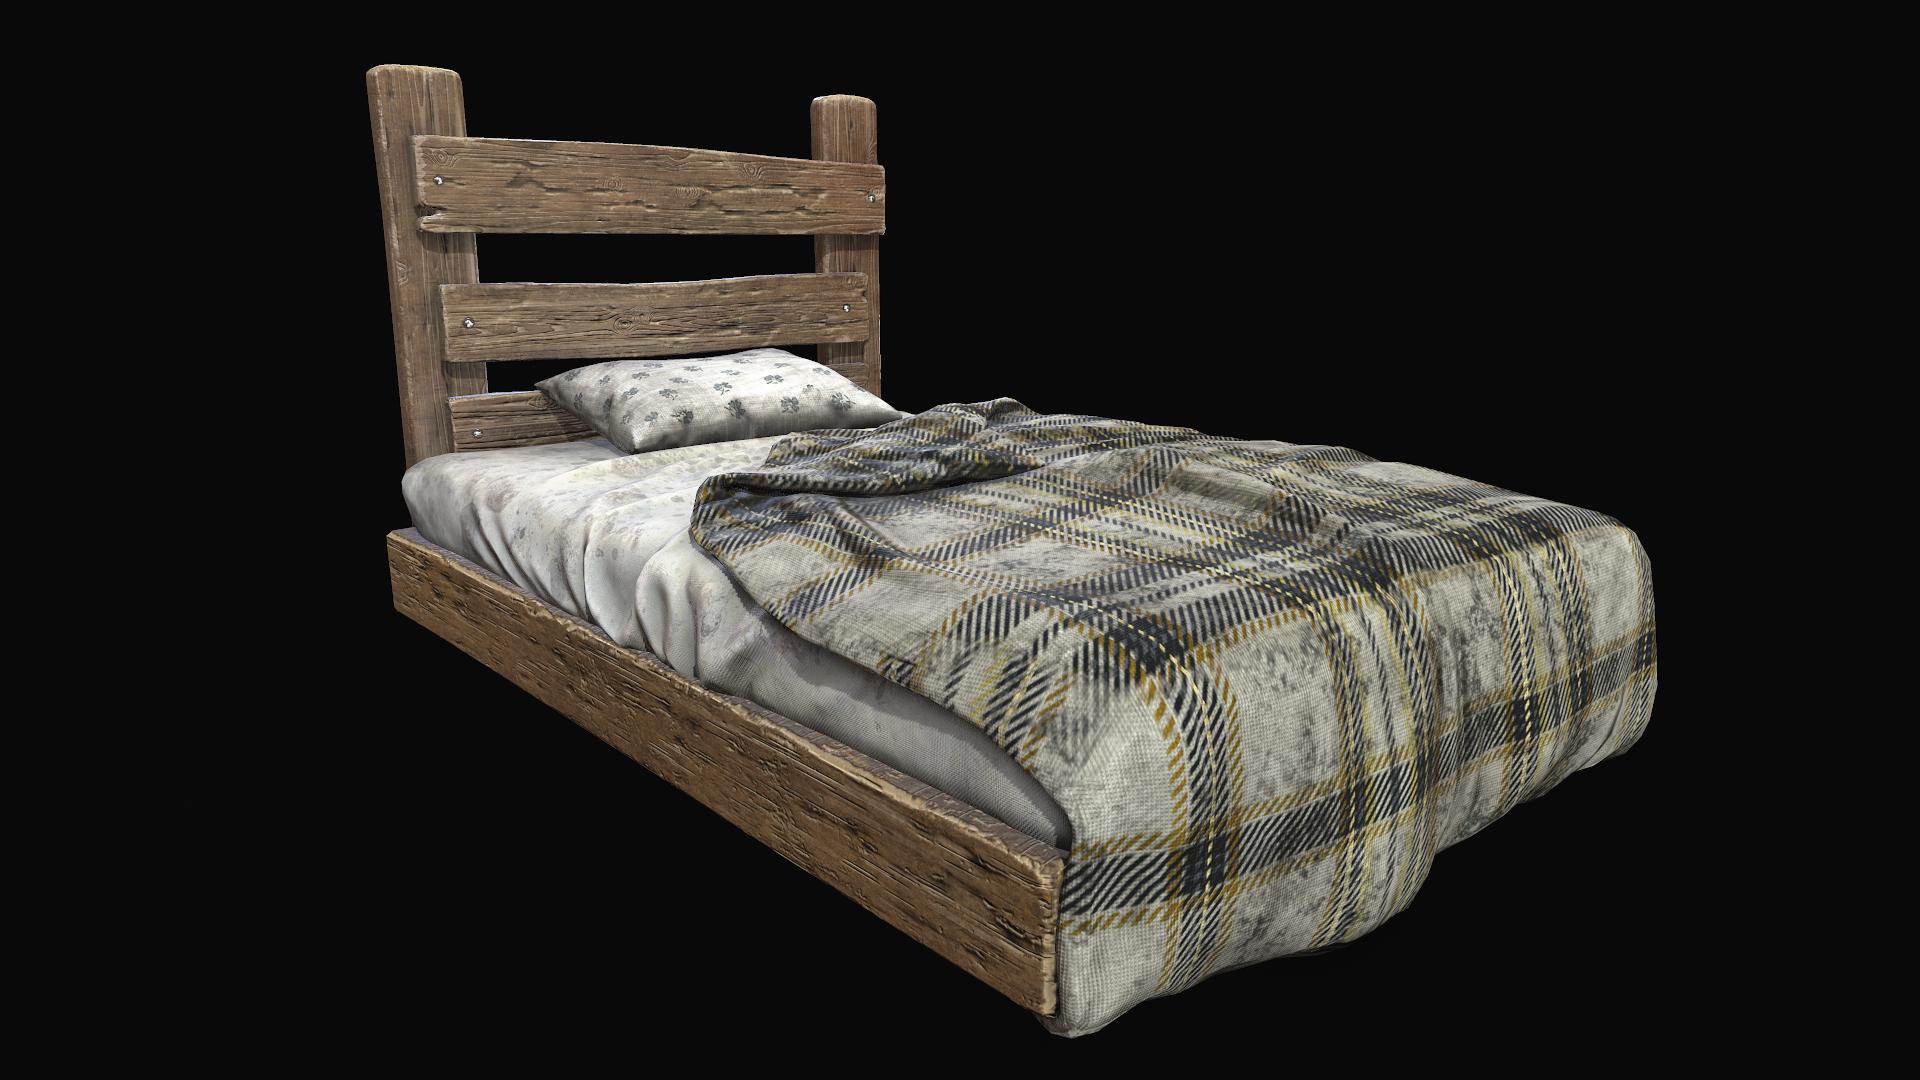 badtRIP on X: Hey some personal works from me old wooden Hobo Bed modeling  with #maya high poly #zbrush textures with #SubstancePainter render with  #marmosettoolbag retopology #instalod @InstaLOD_io @Substance3D @marmosetco  @pixologic Artstation